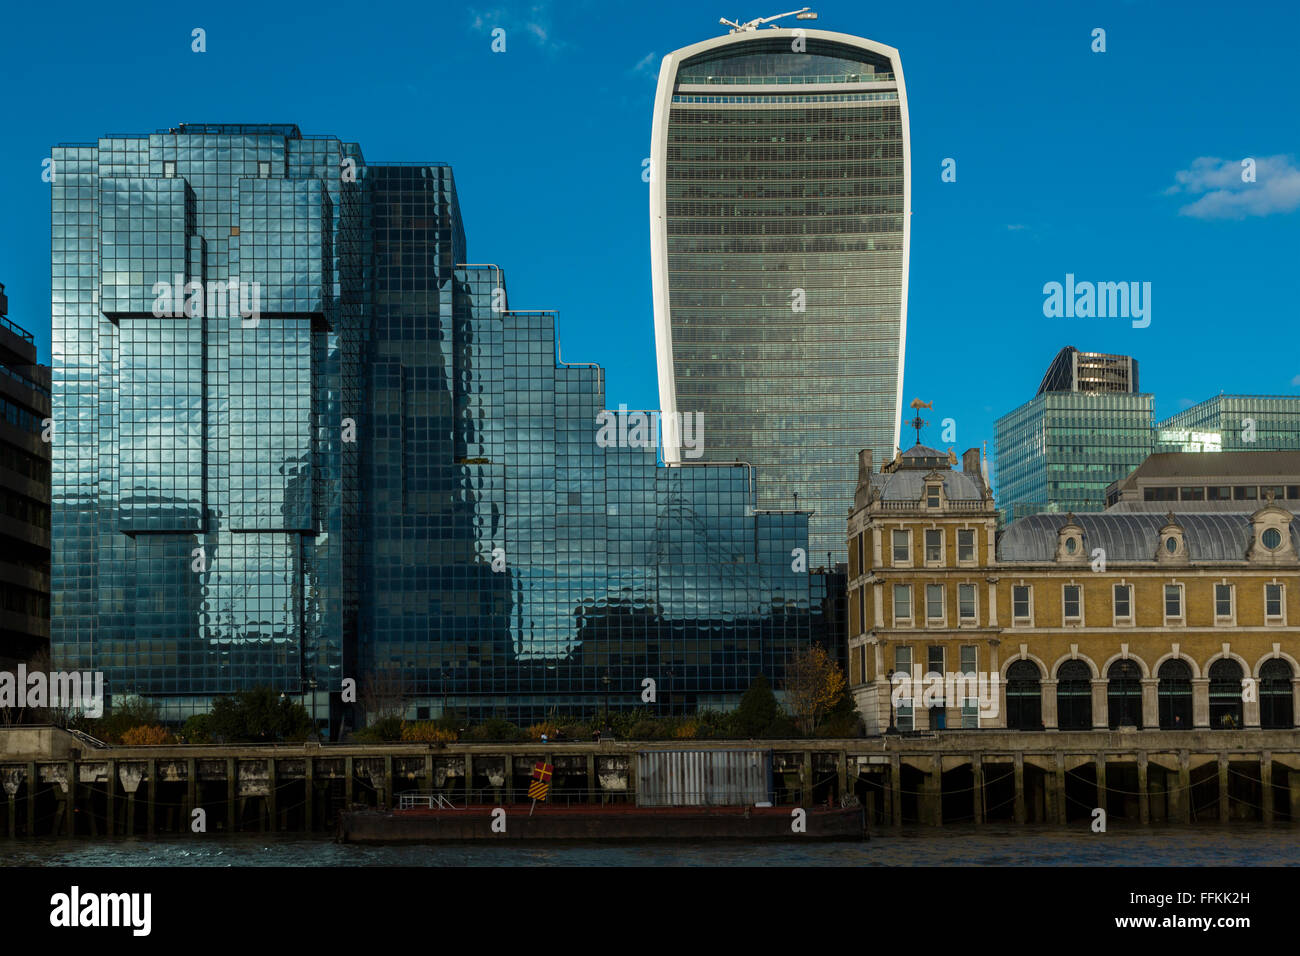 Skyline behind Lower Thames street, along the Thames river, London, England Stock Photo